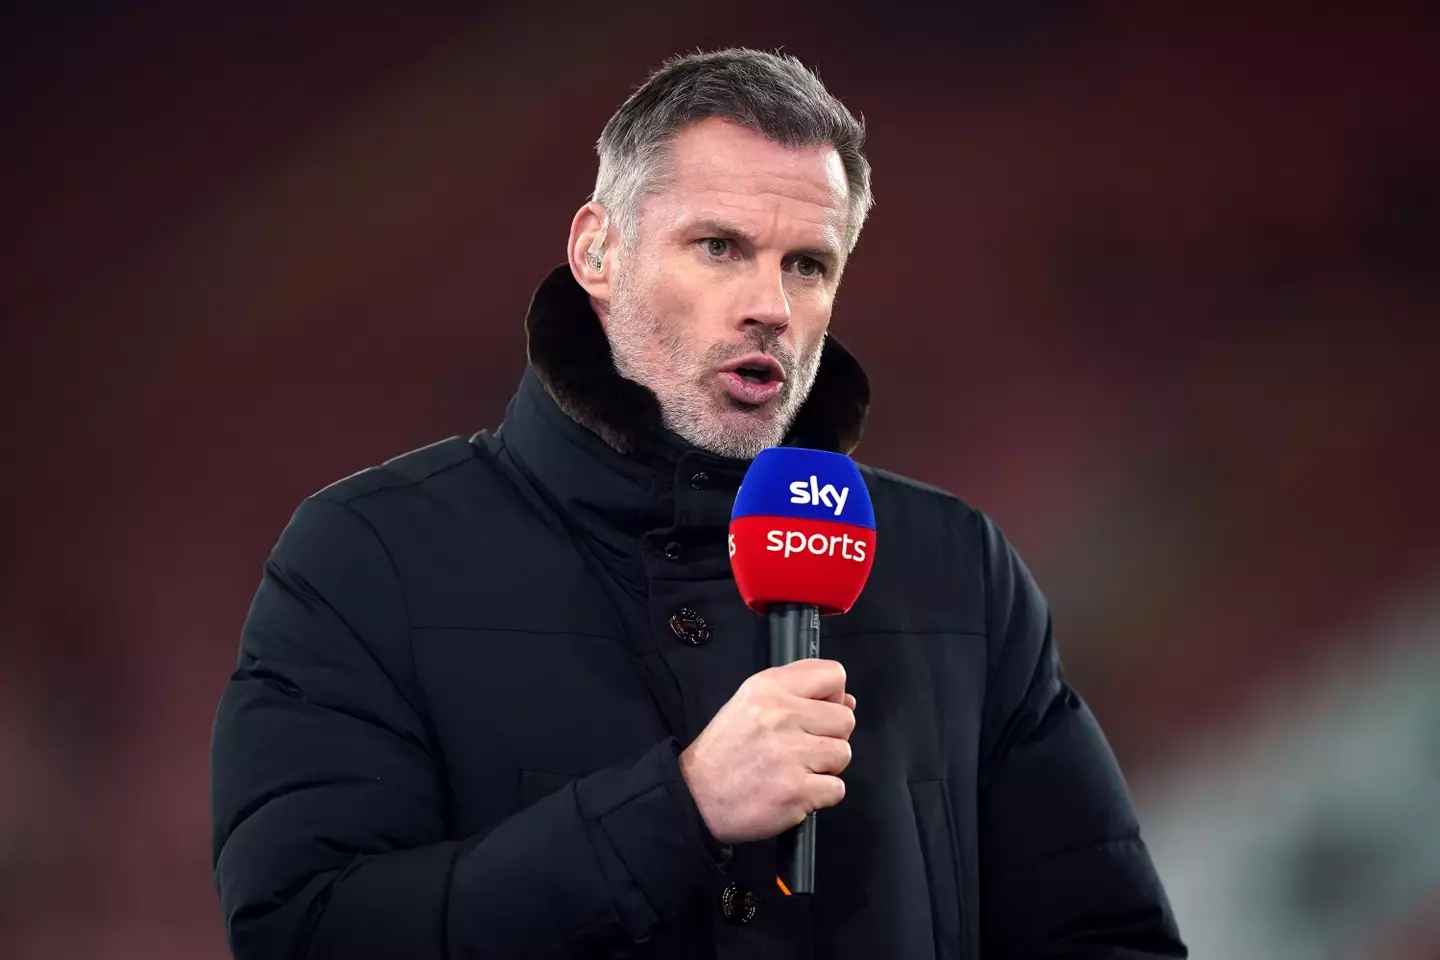 Carragher was working at the match as a pundit for Sky Sports (Image: Alamy)